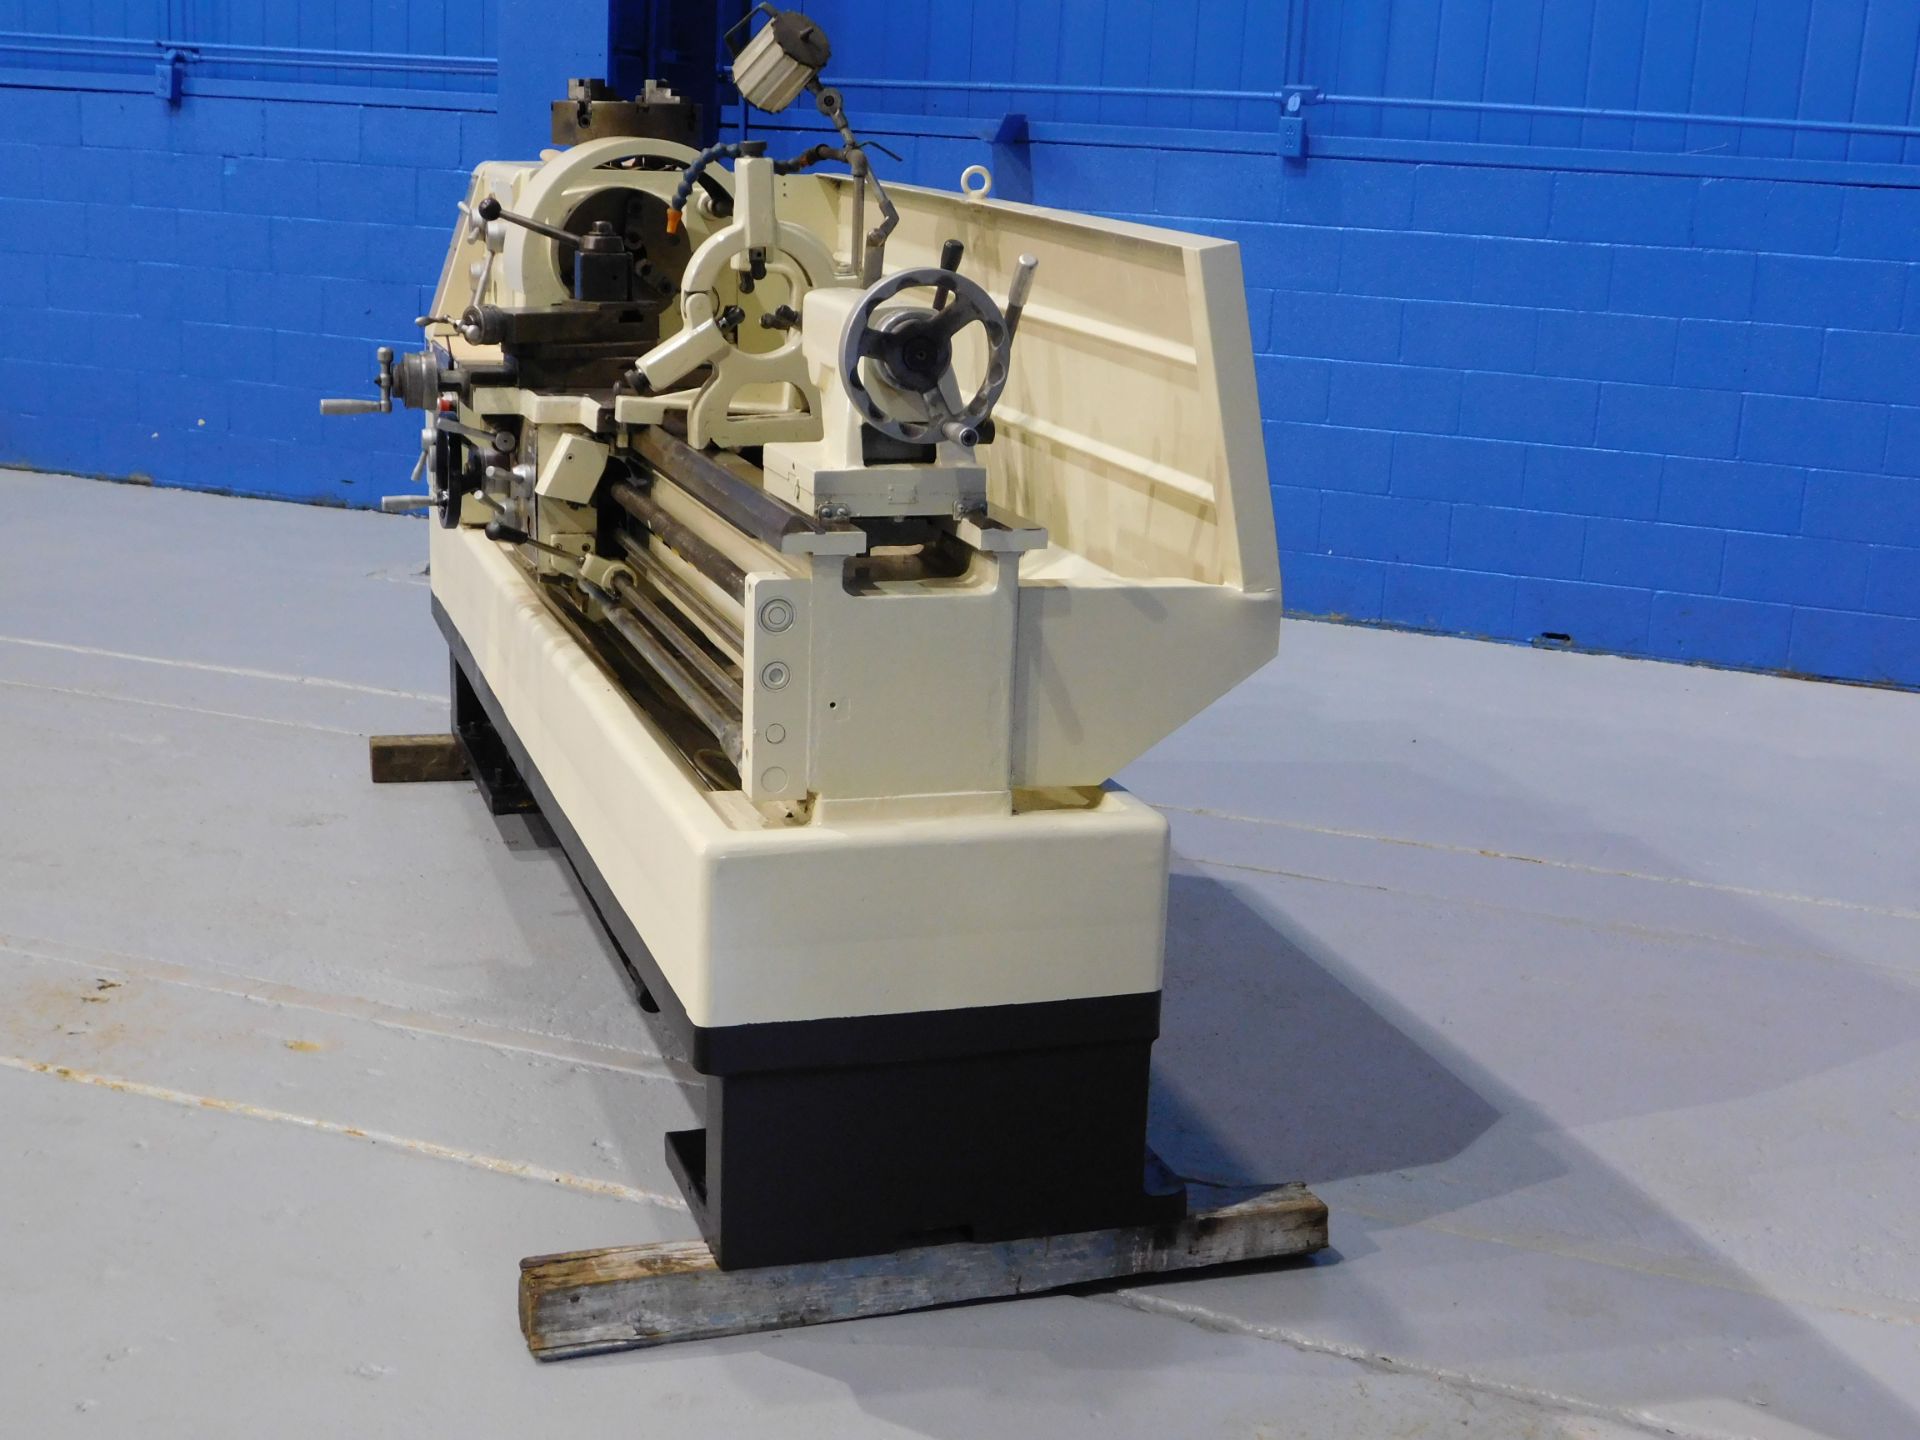 2007 Vectrax Engine Lathe, 16" x 60", Mdl: DY-410-1500, S/N: AY-A6-068 - Painesville, OH - 6511P - Image 2 of 8